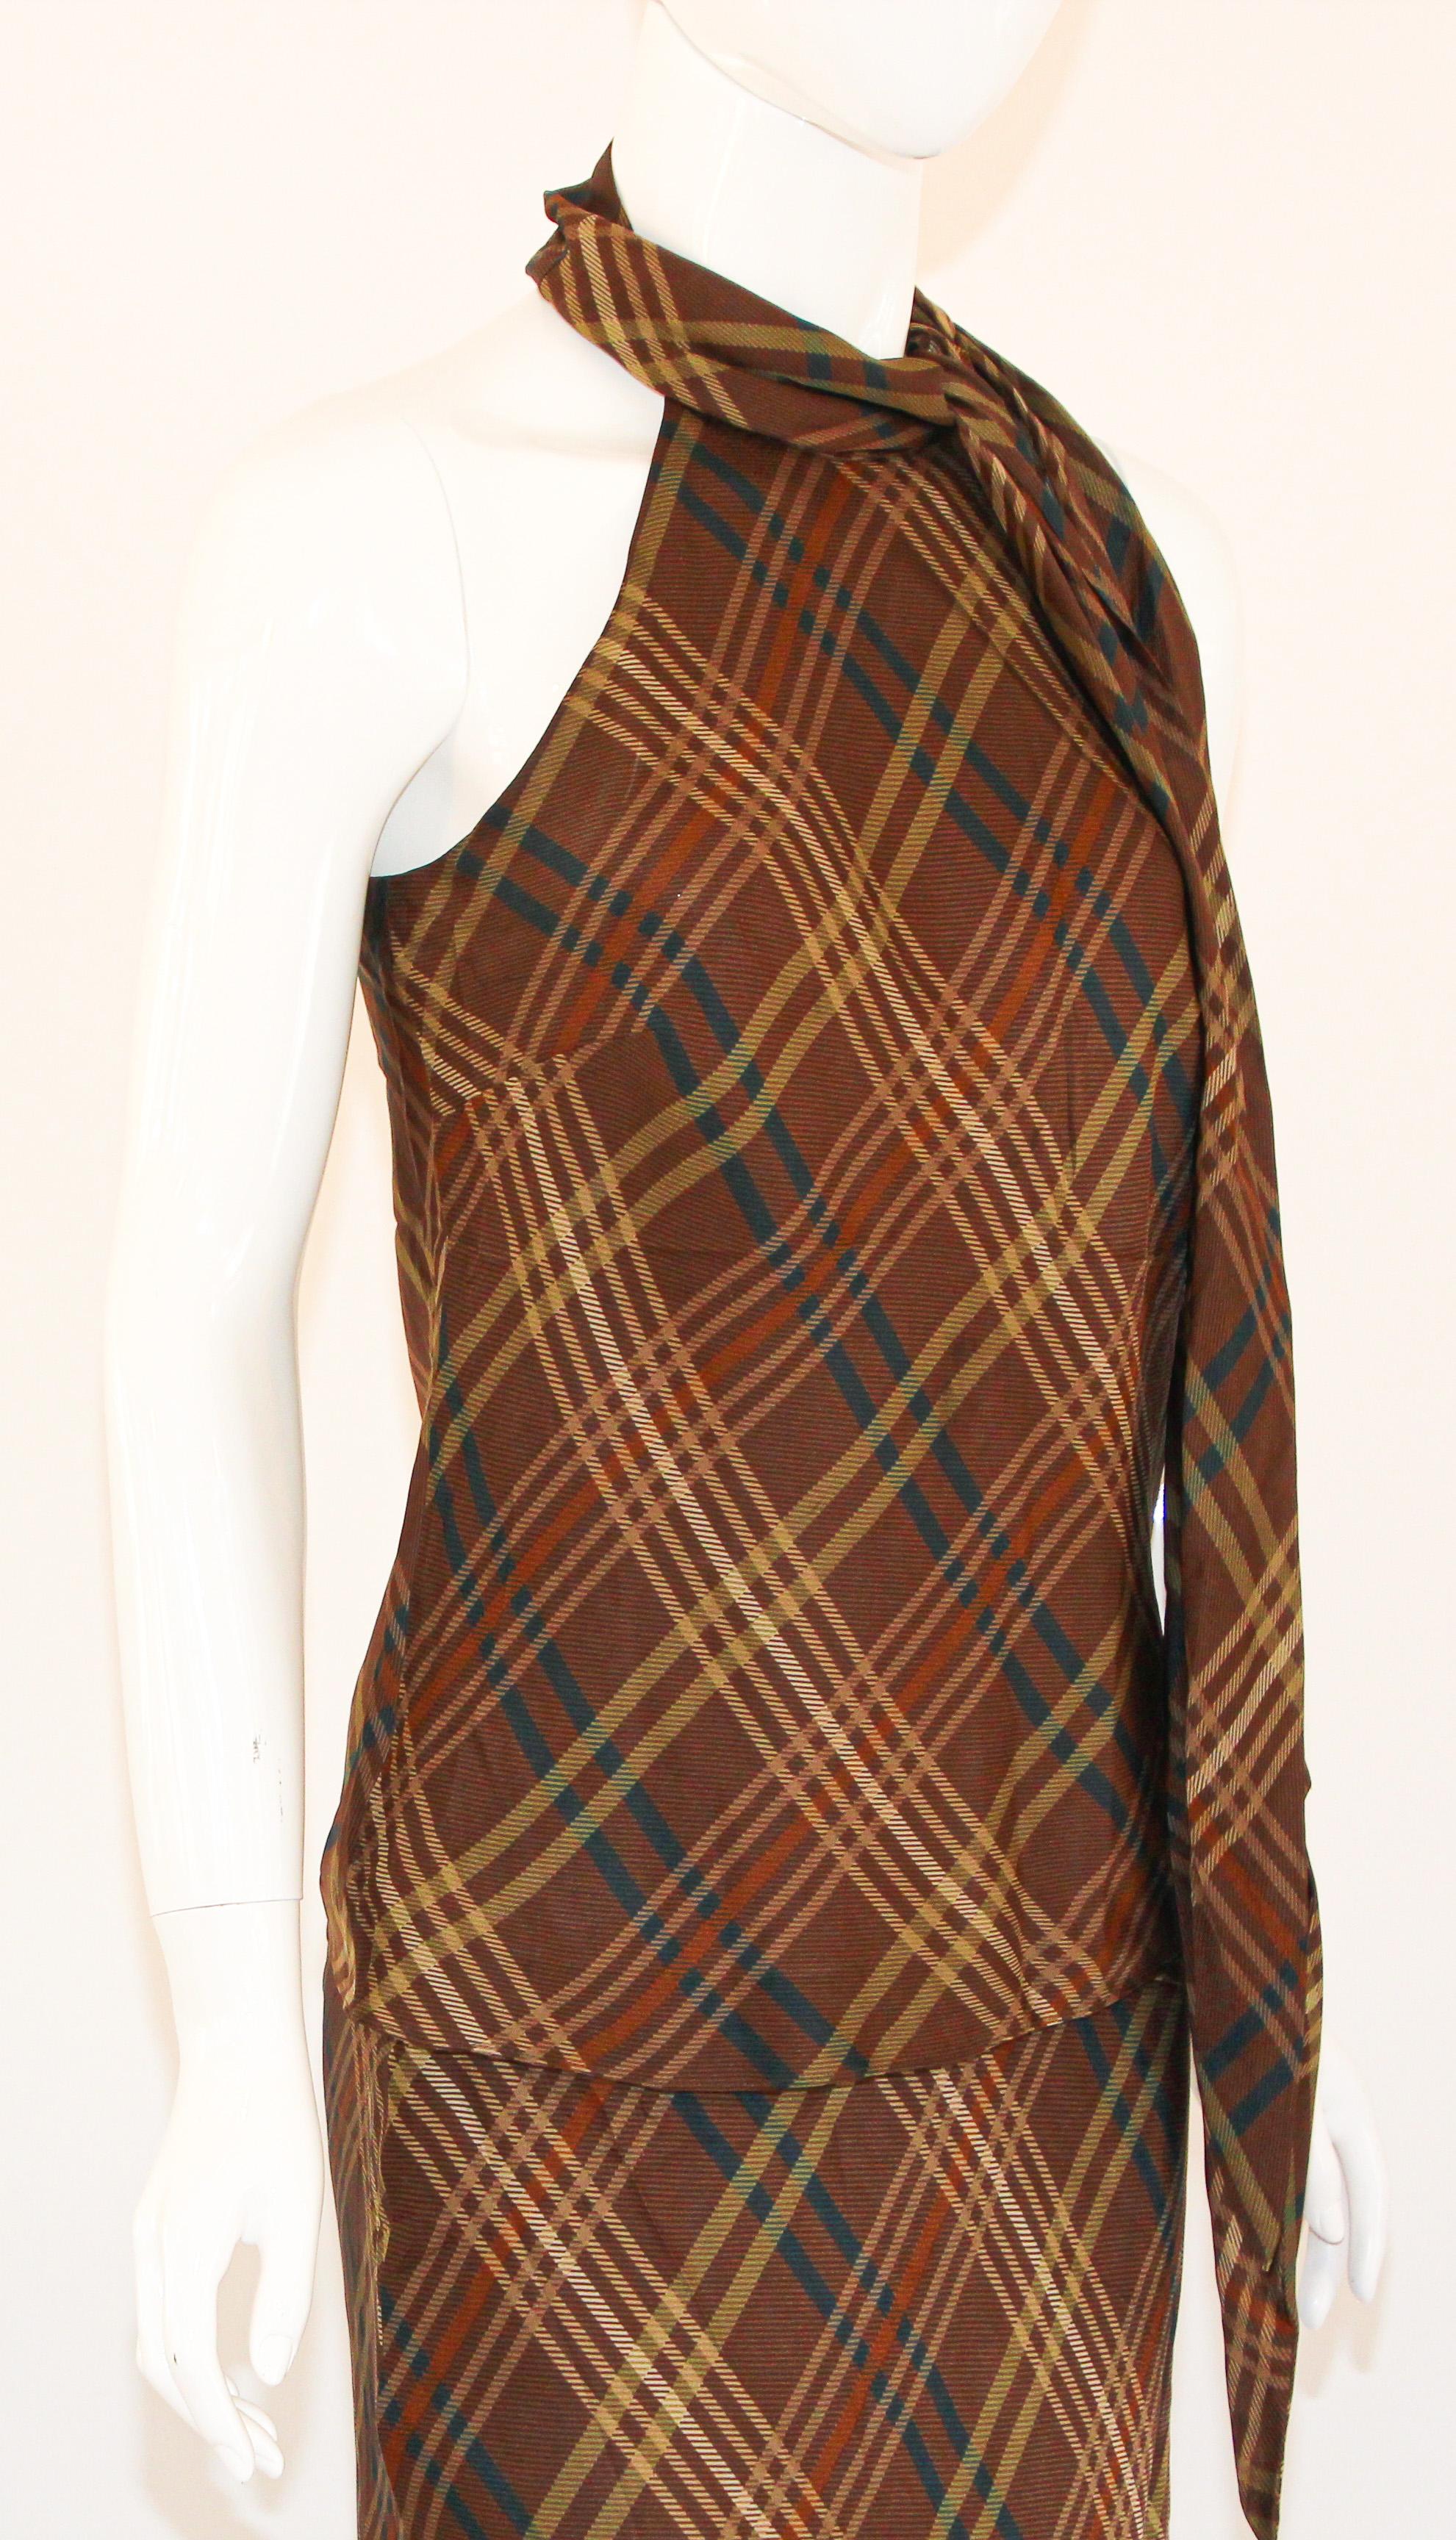 Ralph Lauren Silk Sleeveless Shirt and Maxi Skirt Set Brown Tartan.
With a tie-neck accent serves as the focal point of this glamorous sleeveless shirt and maxi skirt set.
Brown tartan plaid pattern, cut for an ankle-grazing silhouette.
Sheer silk